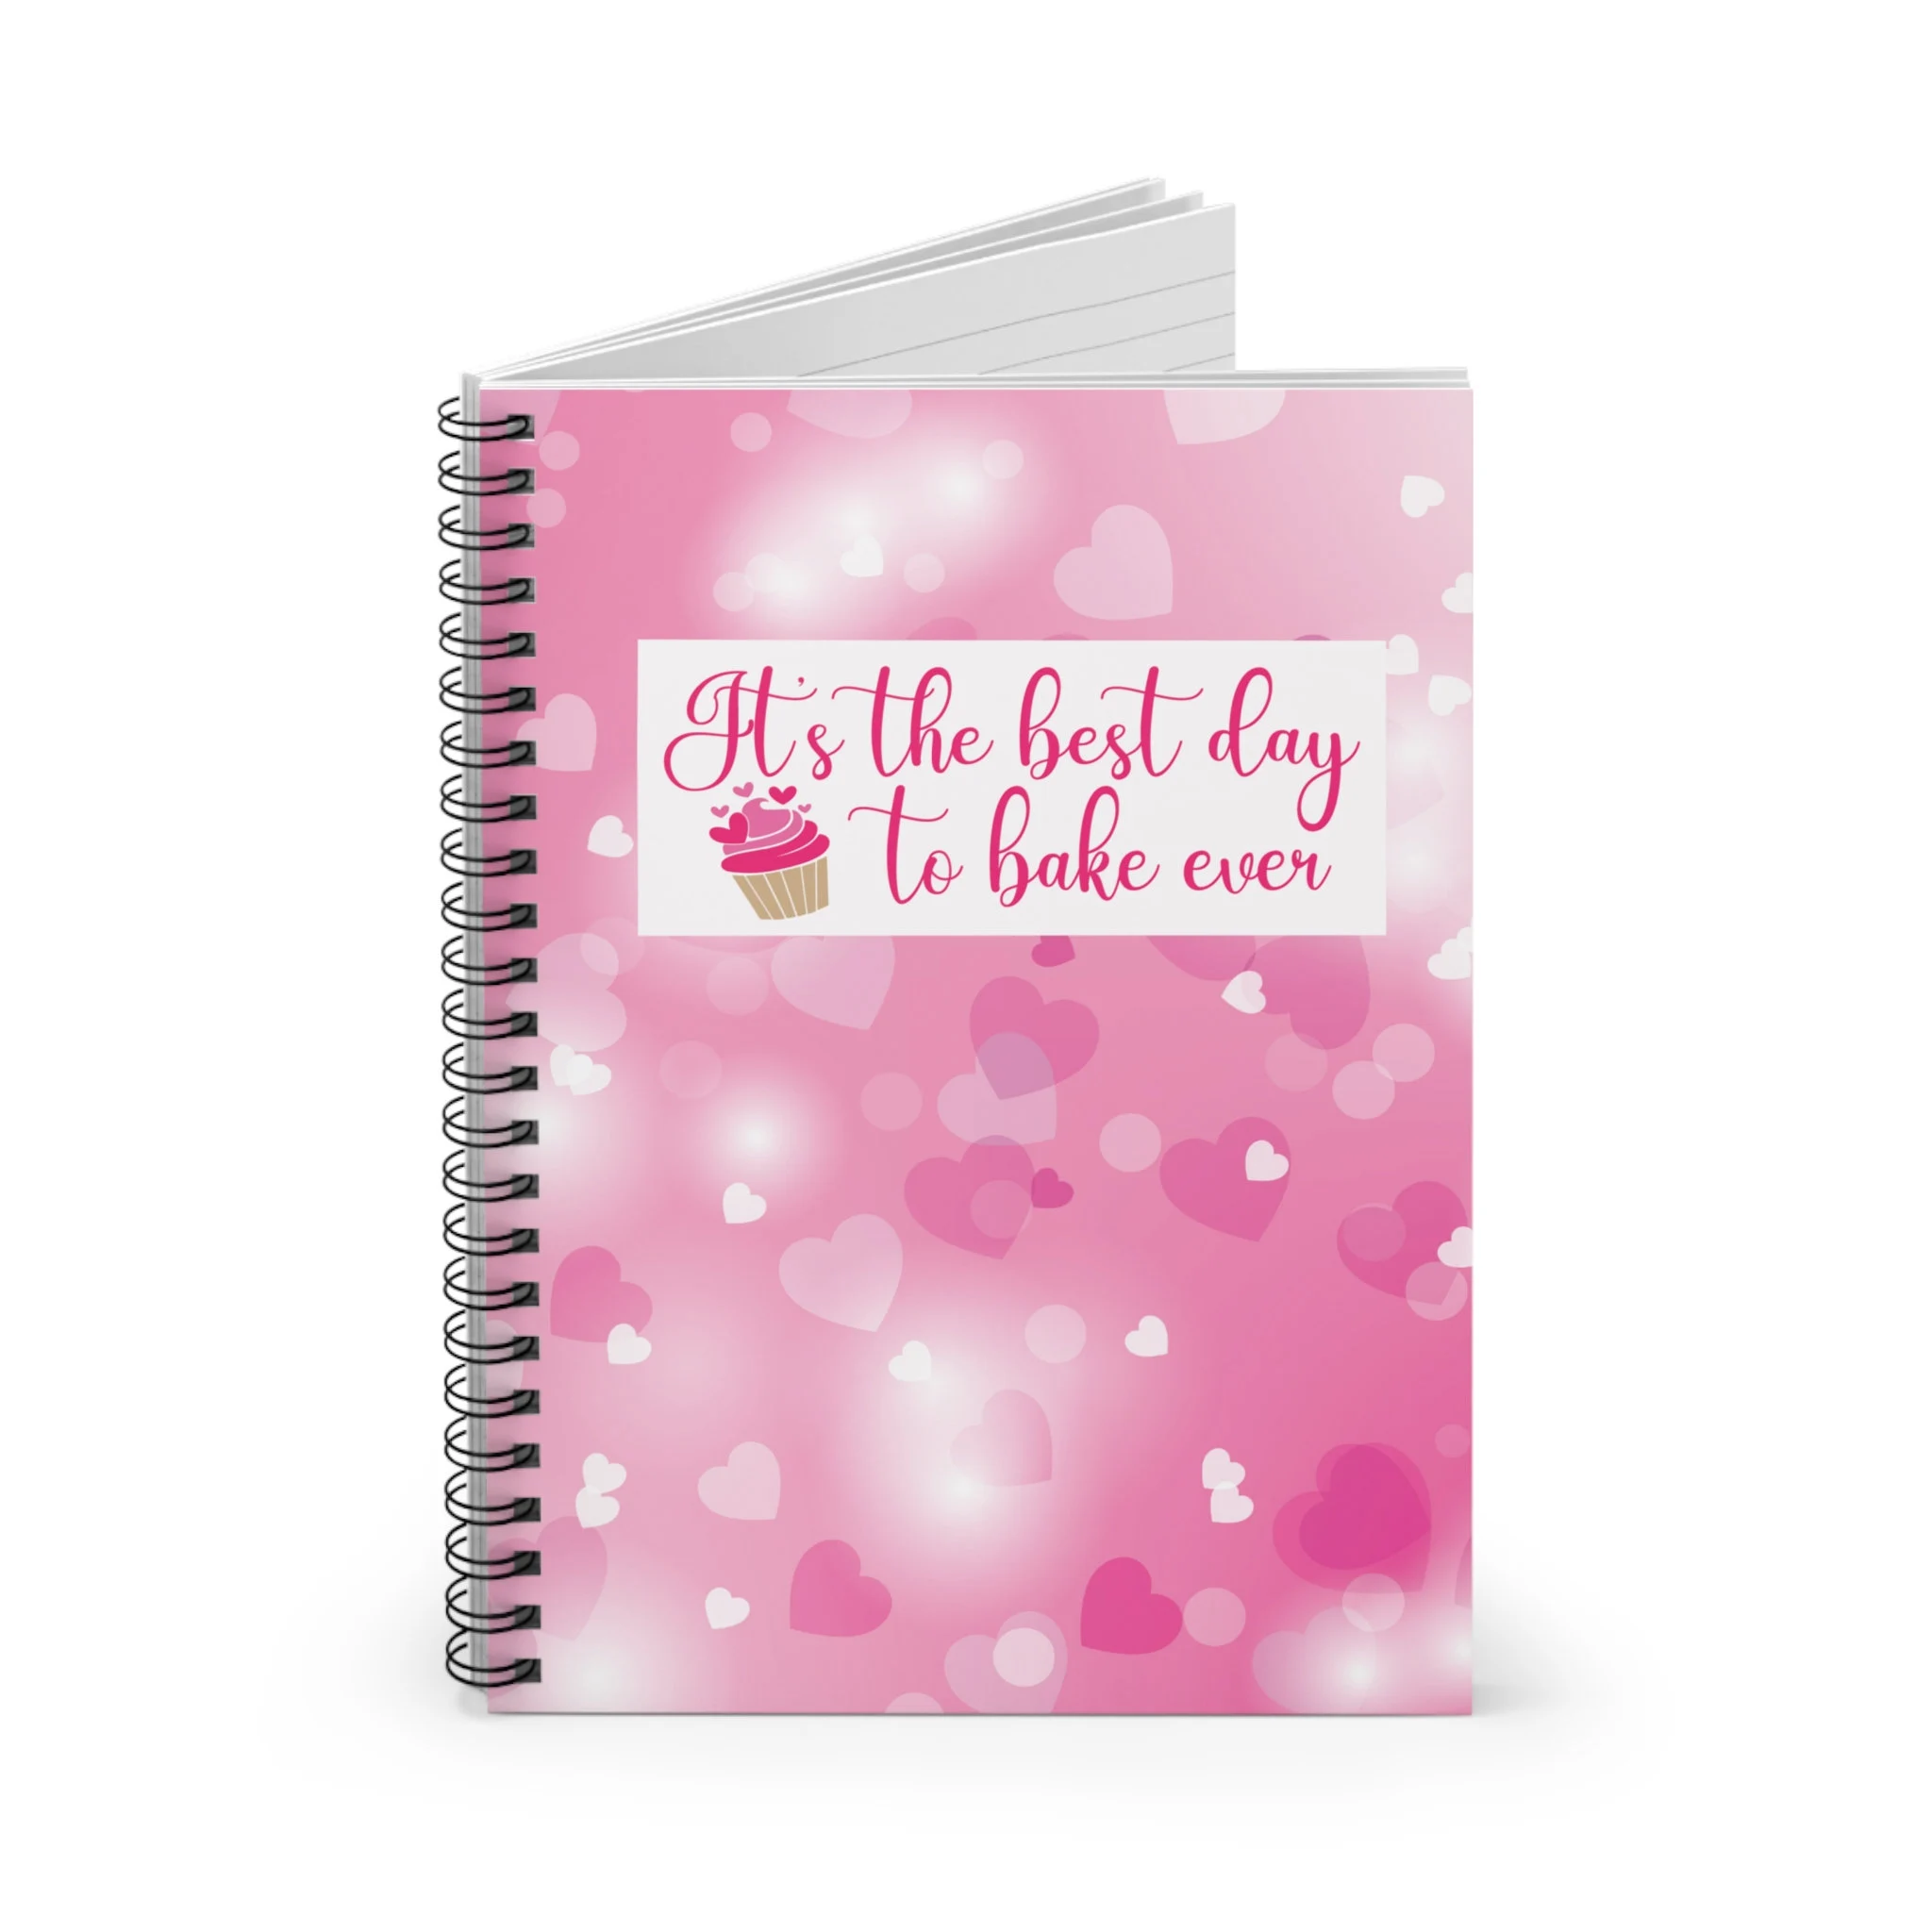 Pink spiral notebook with the text "it's the best day to bake ever".